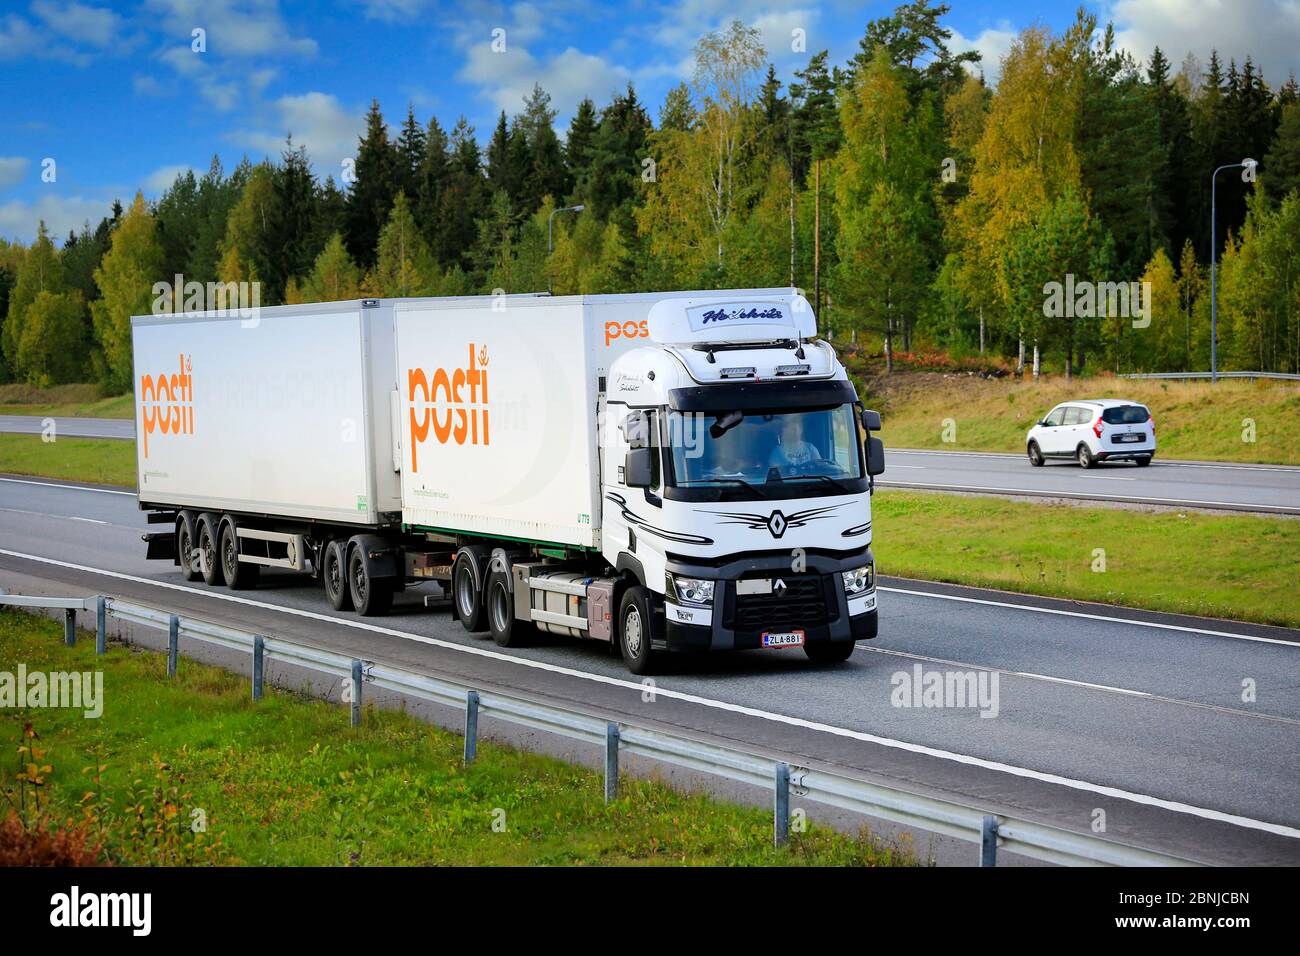 White Renault Trucks T truck for the deliveries of Finnish Post, Posti Kuljetus Oy at speed on Motorway 1. Salo, Finland. September 28, 2019. Stock Photo